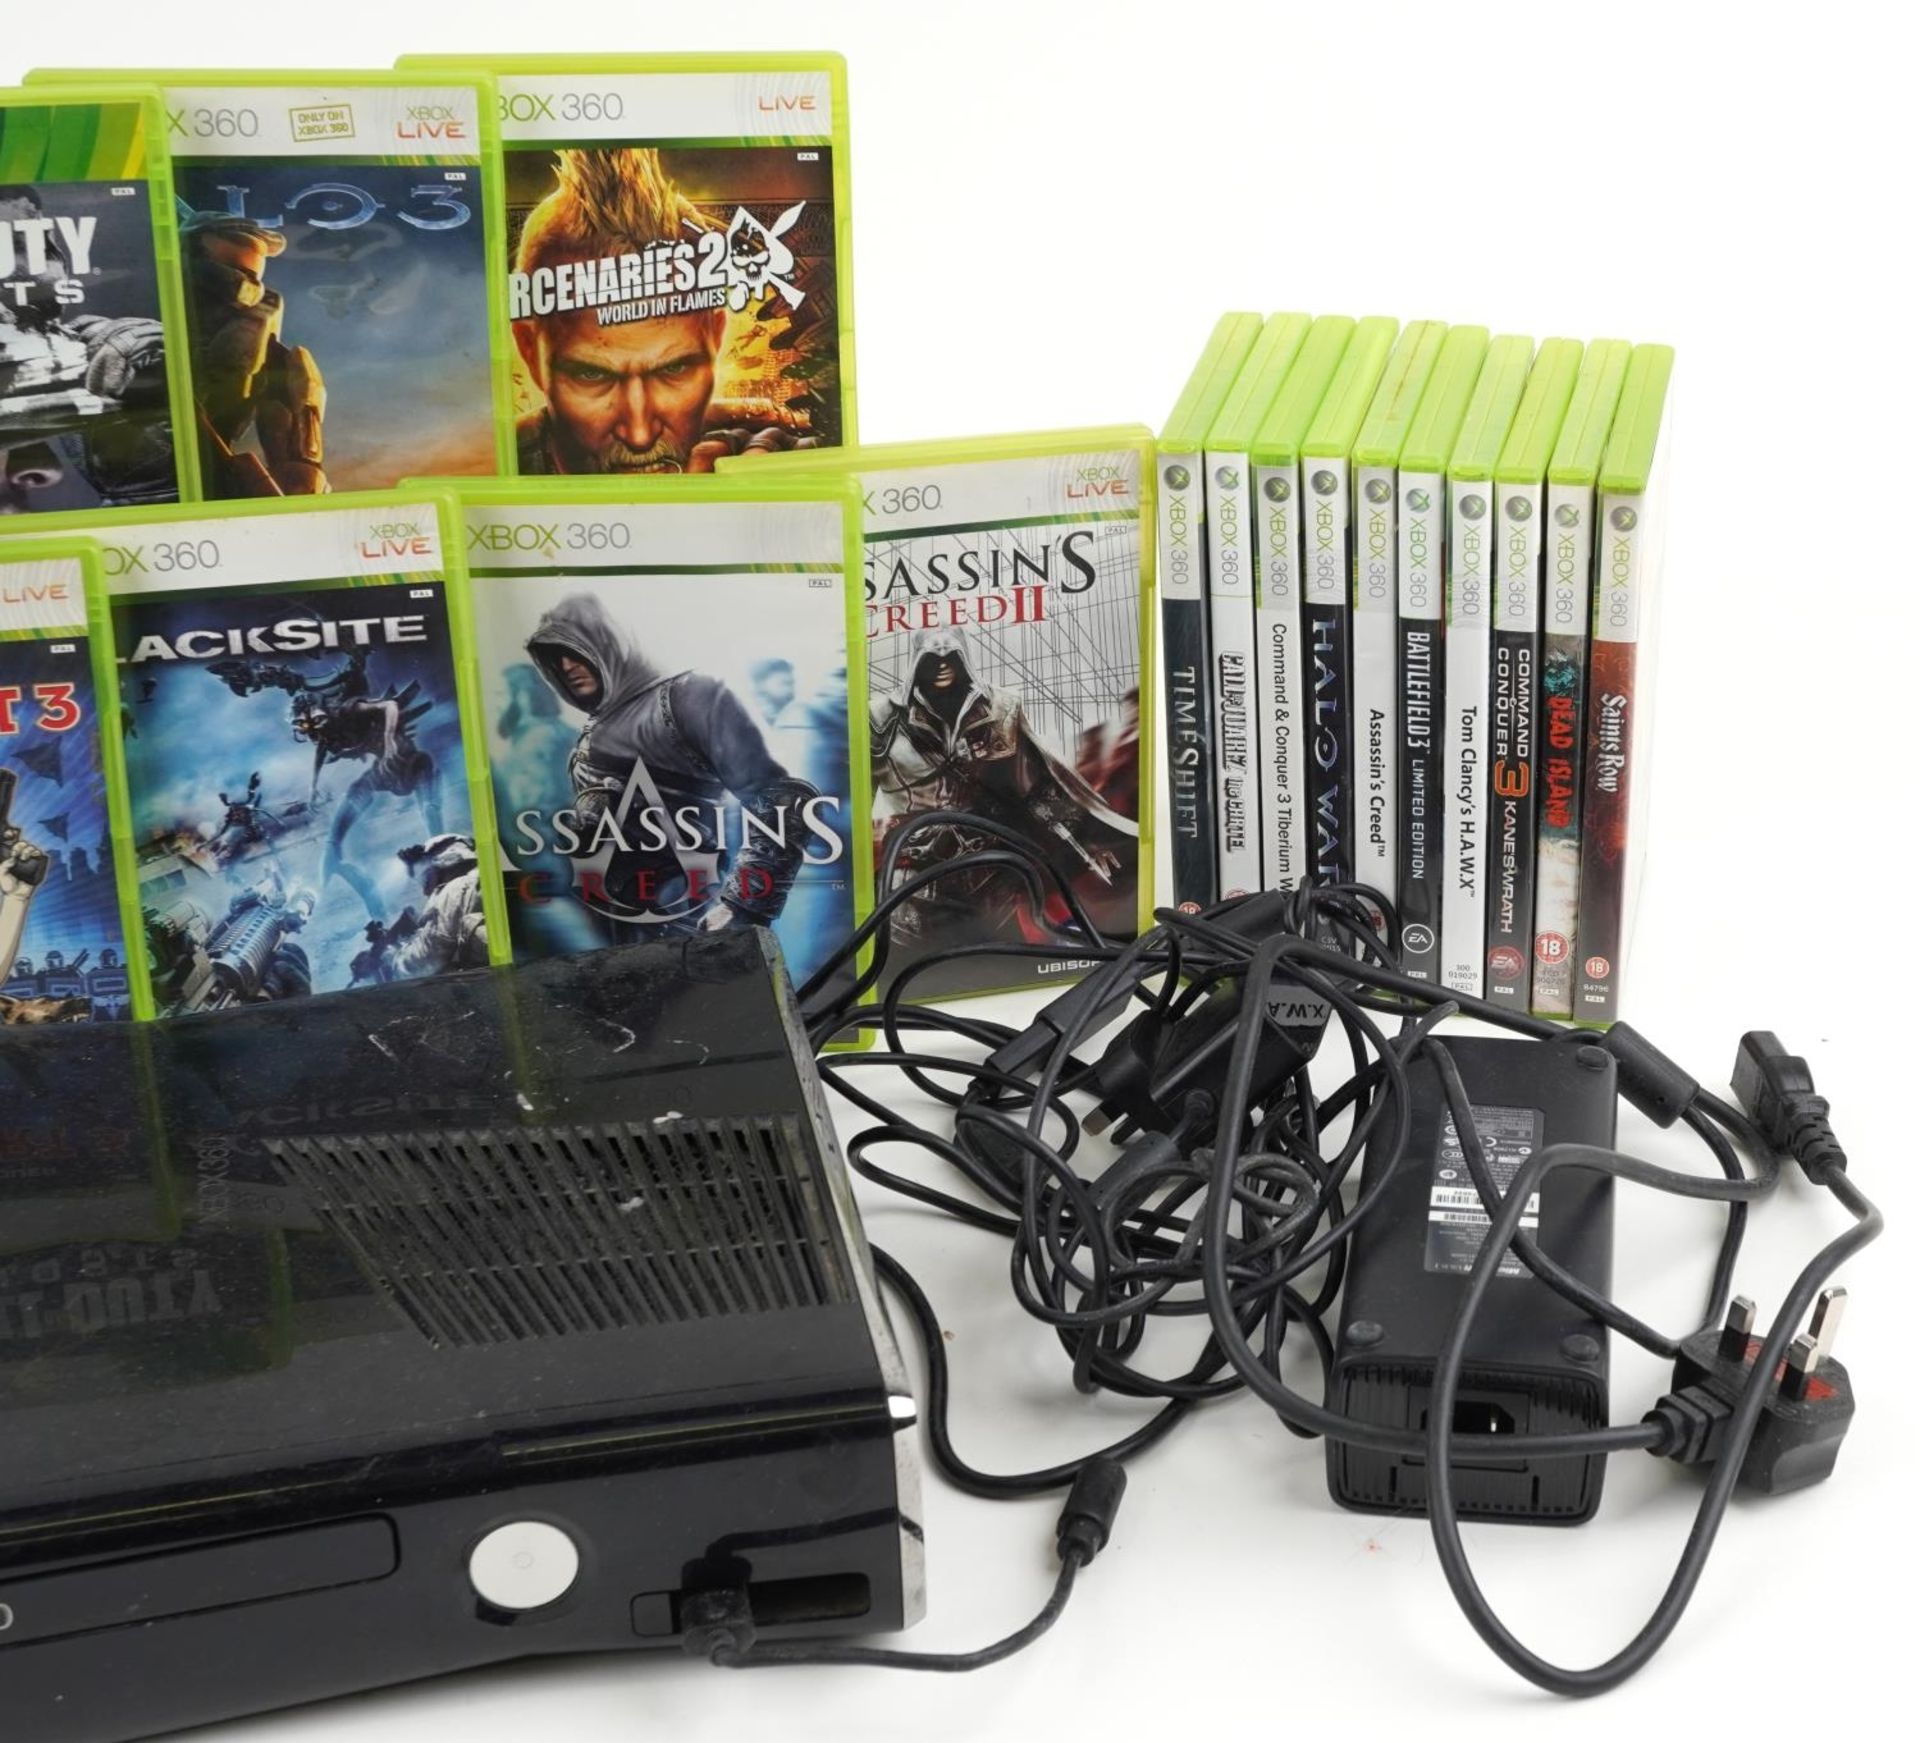 Xbox 360 games console with controller, Xbox Kinect and games including Halo Wars, Assassin's creed, - Image 3 of 3